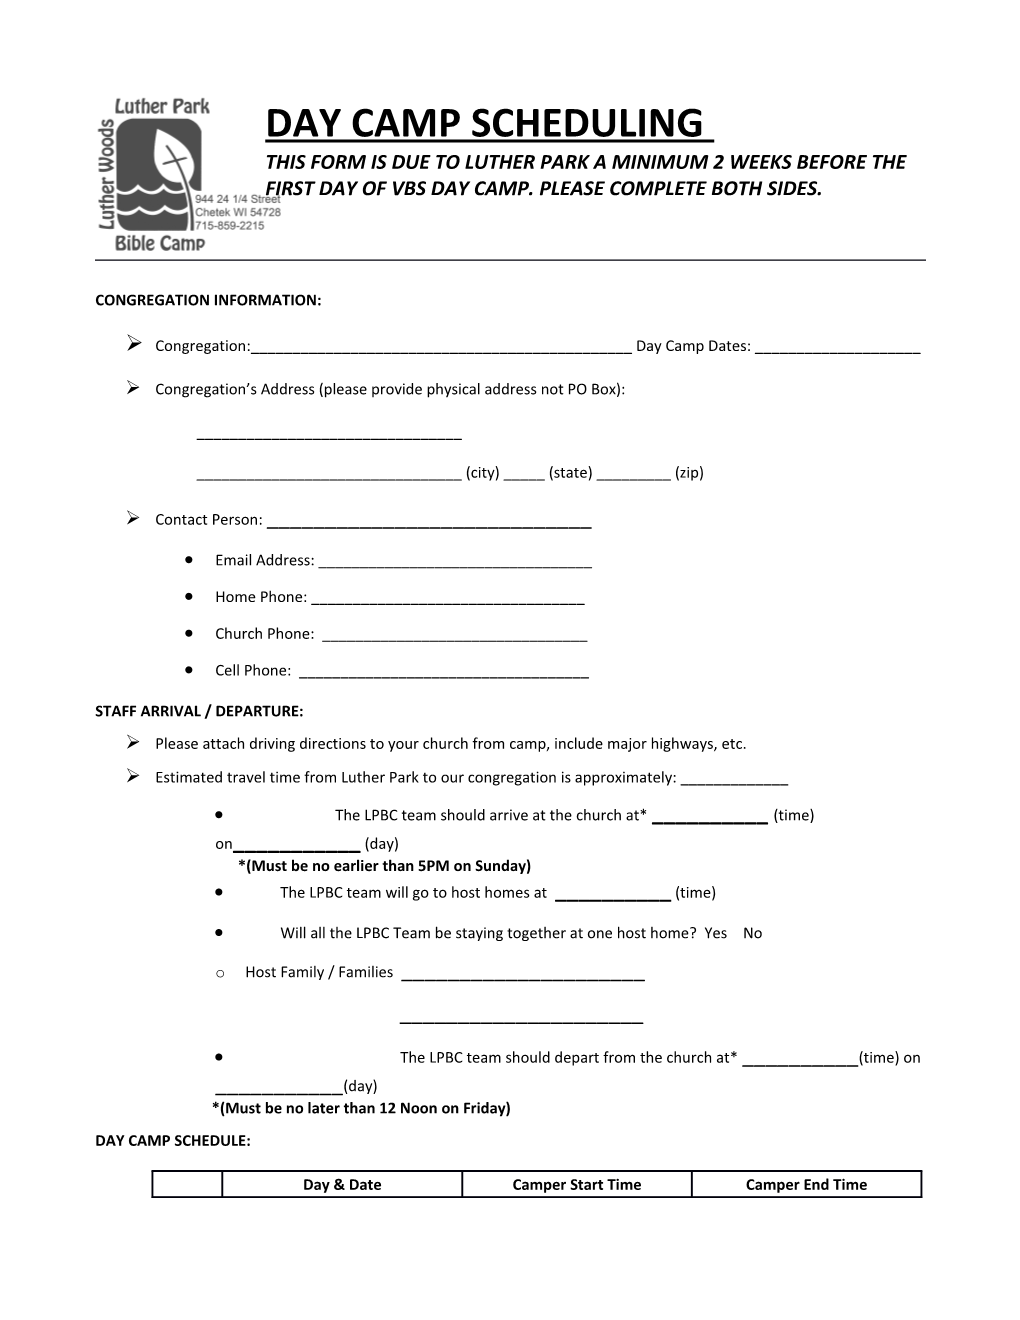 This Form Is Due to Luther Park a Minimum 2 Weeks Before the First Day of Vbs Daycamp